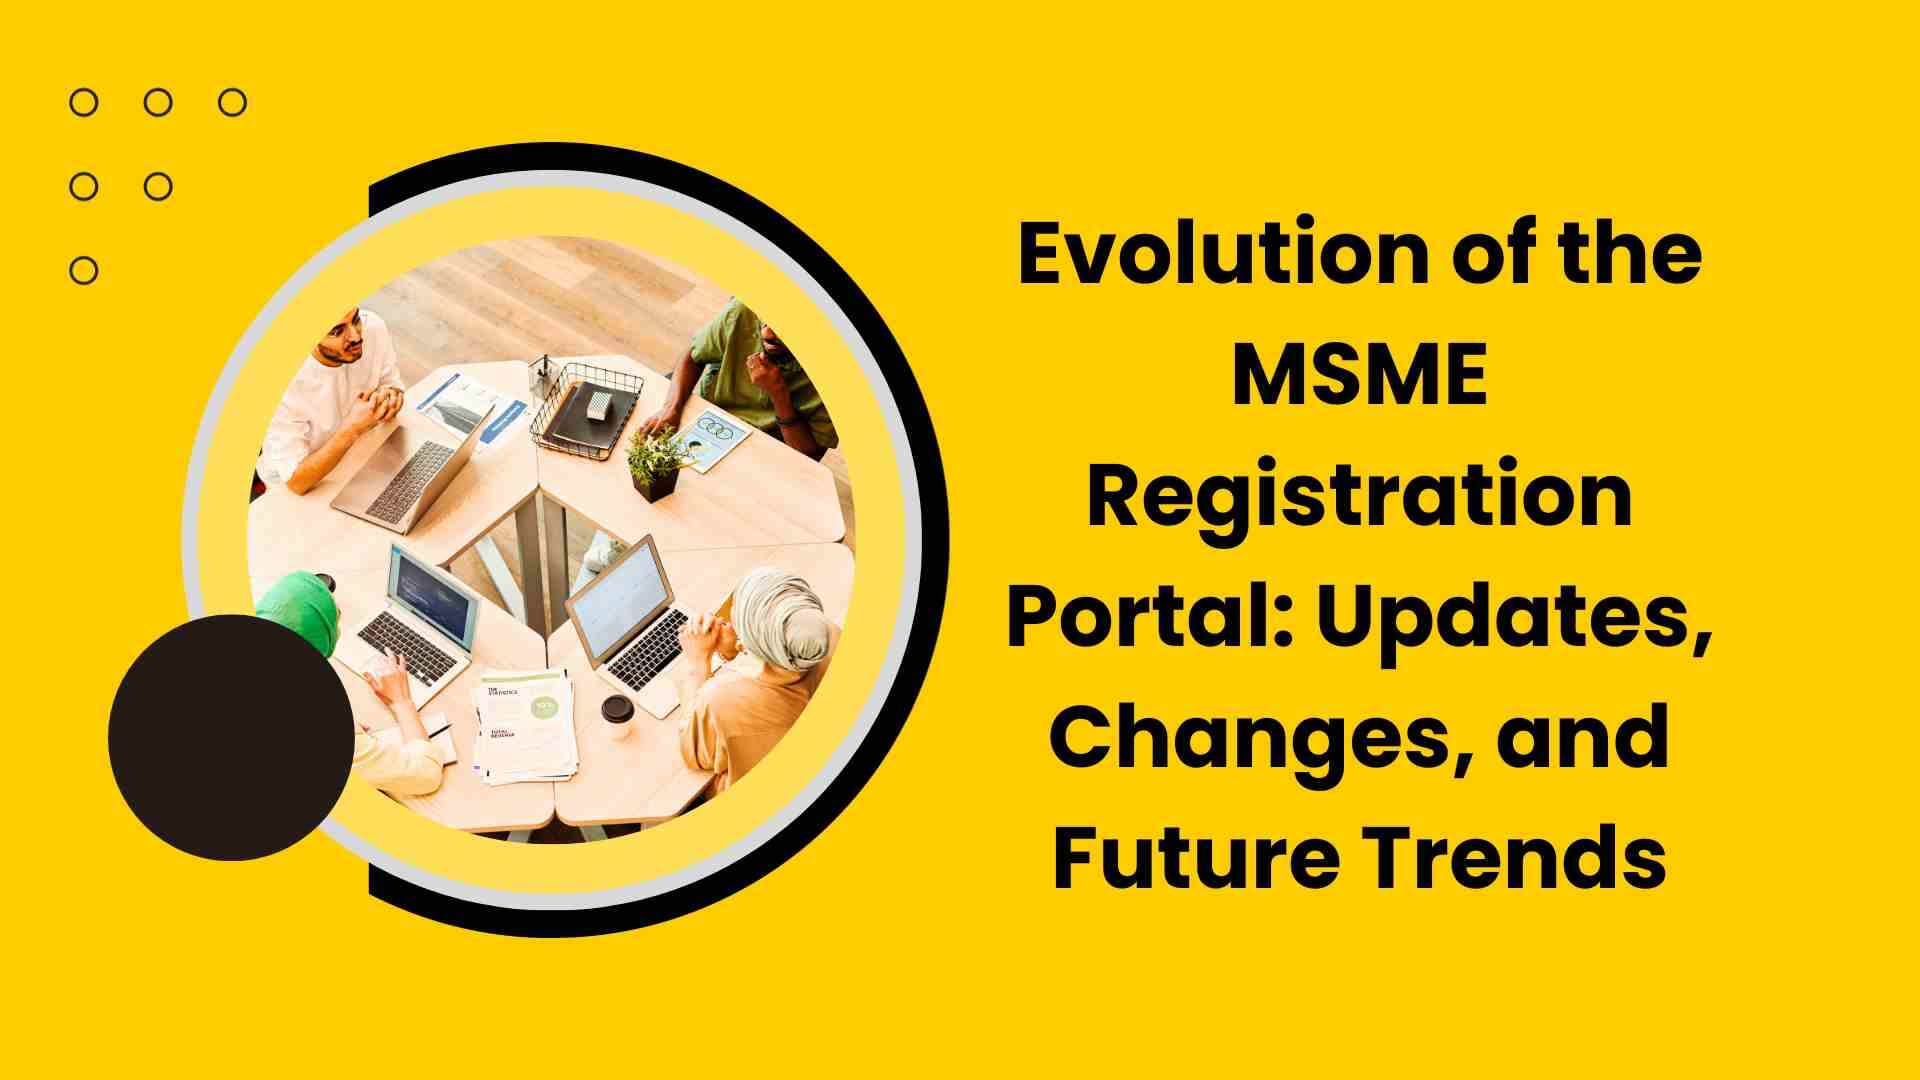 Evolution of the MSME Registration Portal Updates, Changes, and Future Trends